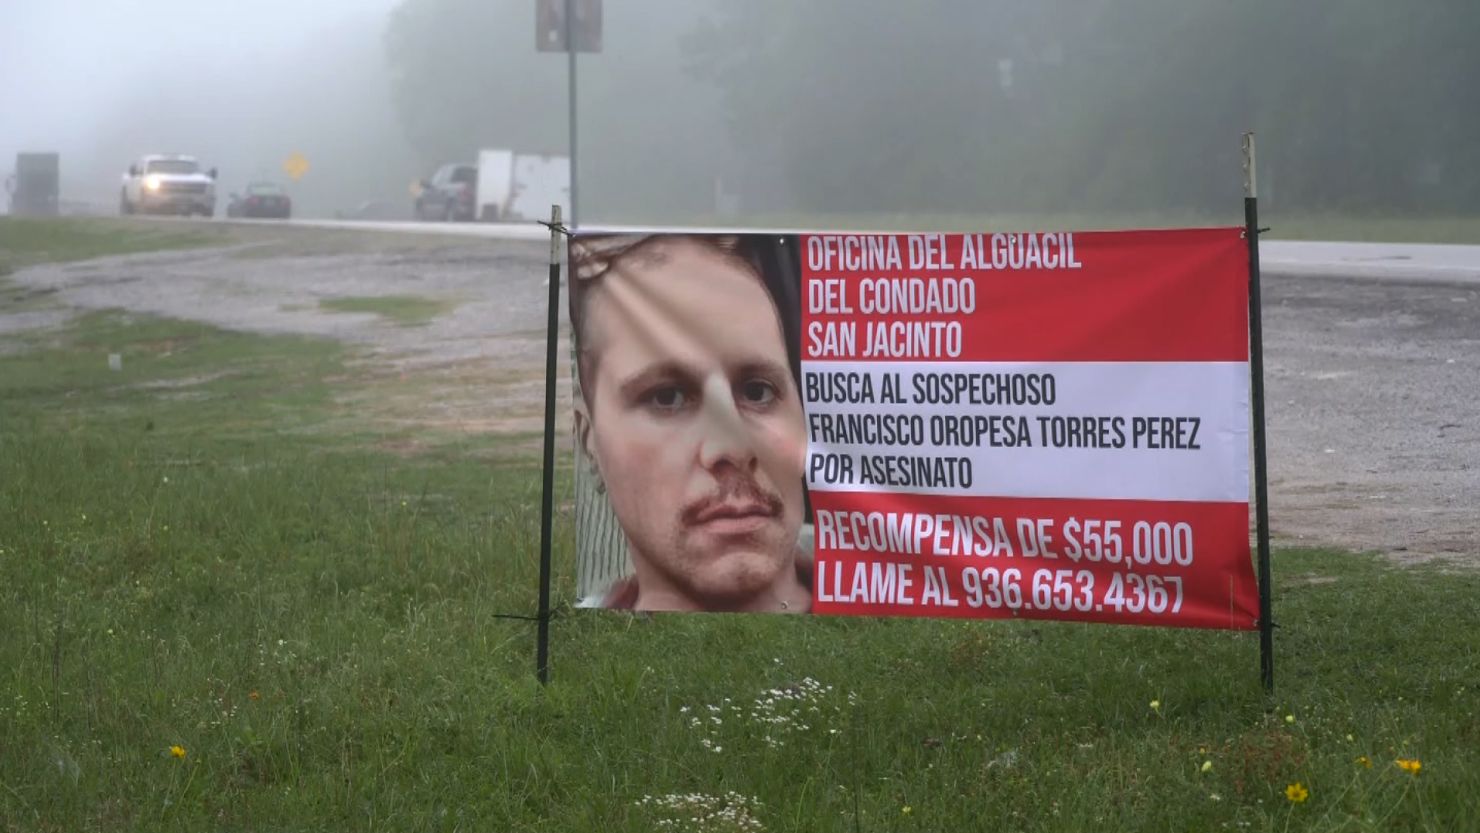 A sign in Spanish shows an image of shooting suspect Francisco Oropesa in Cleveland, Texas, where five people were killed last week.